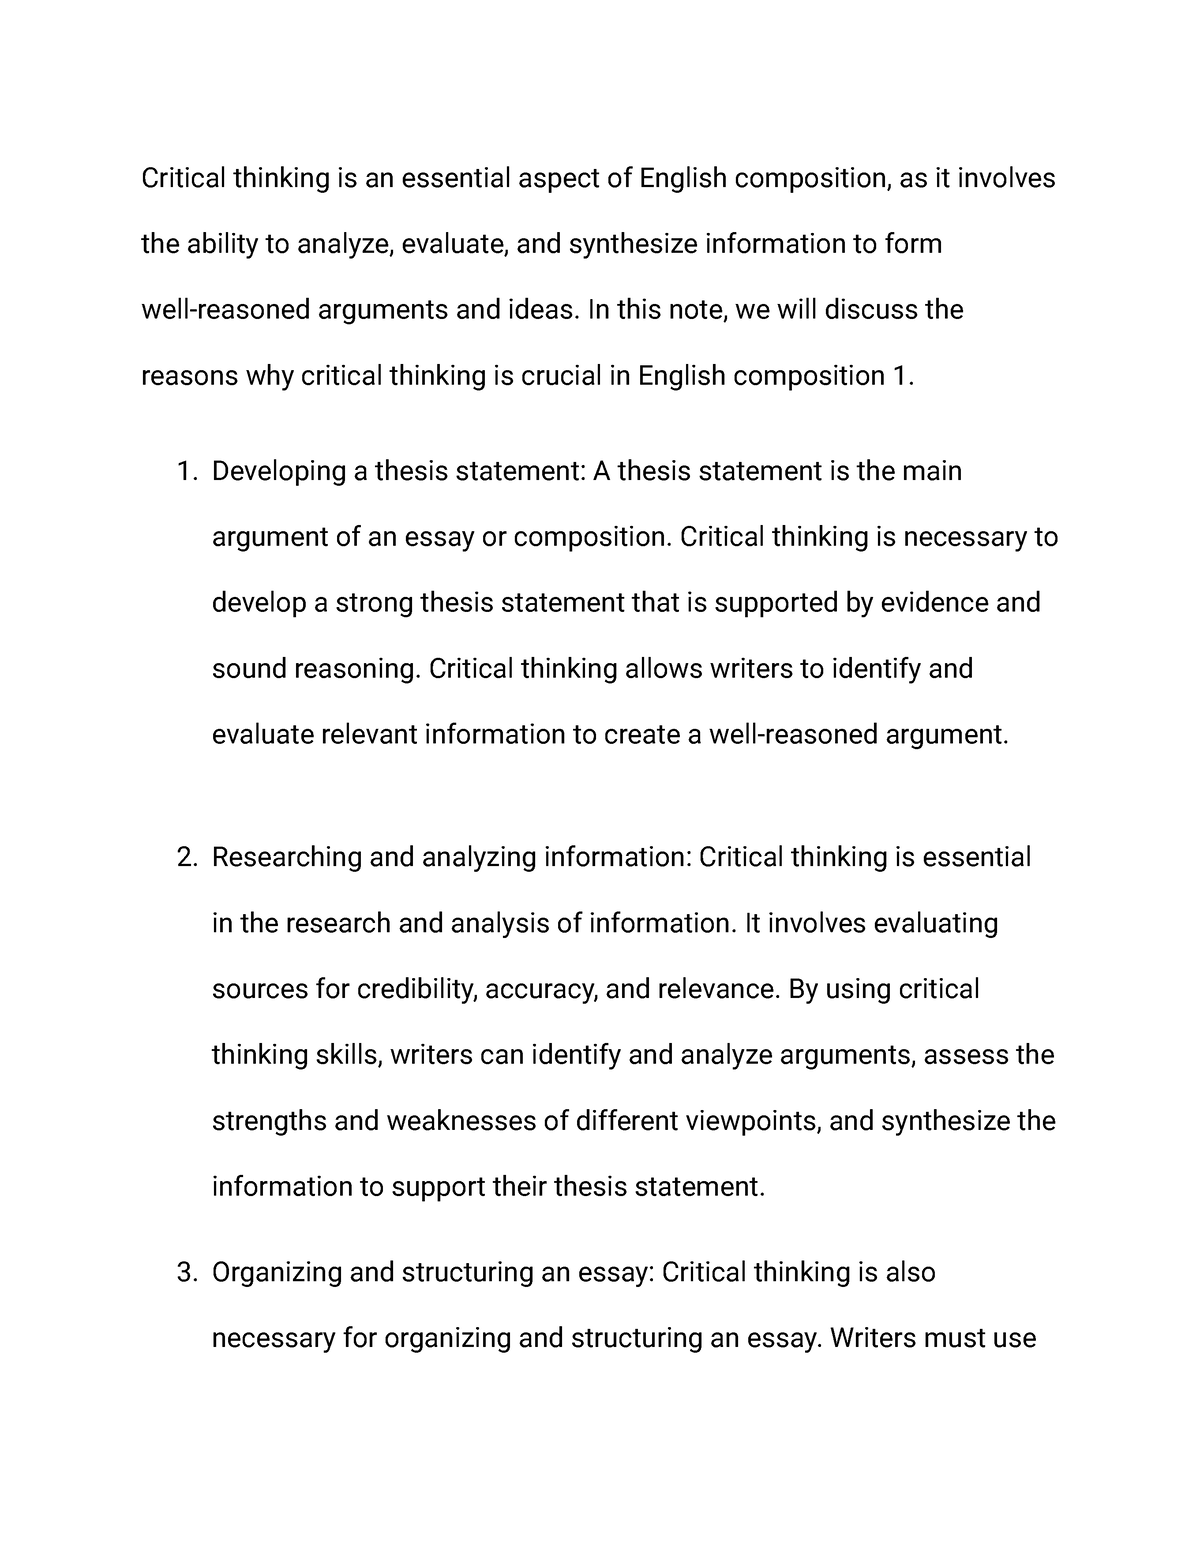 critical thinking english composition